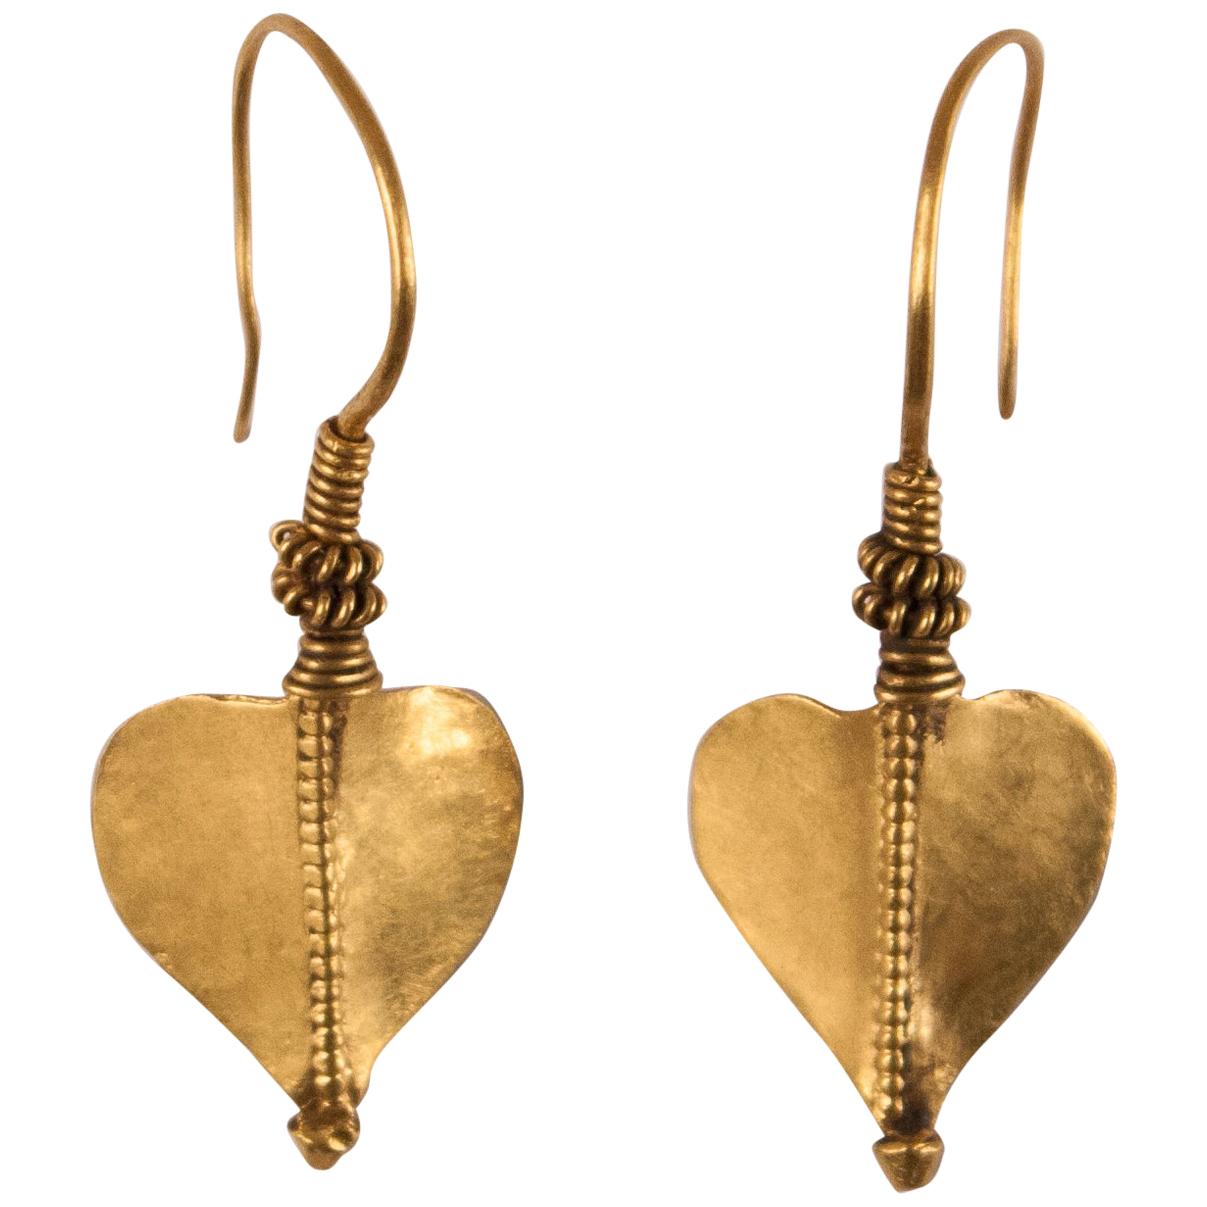 22 Karat Gold Traditional Earrings from India